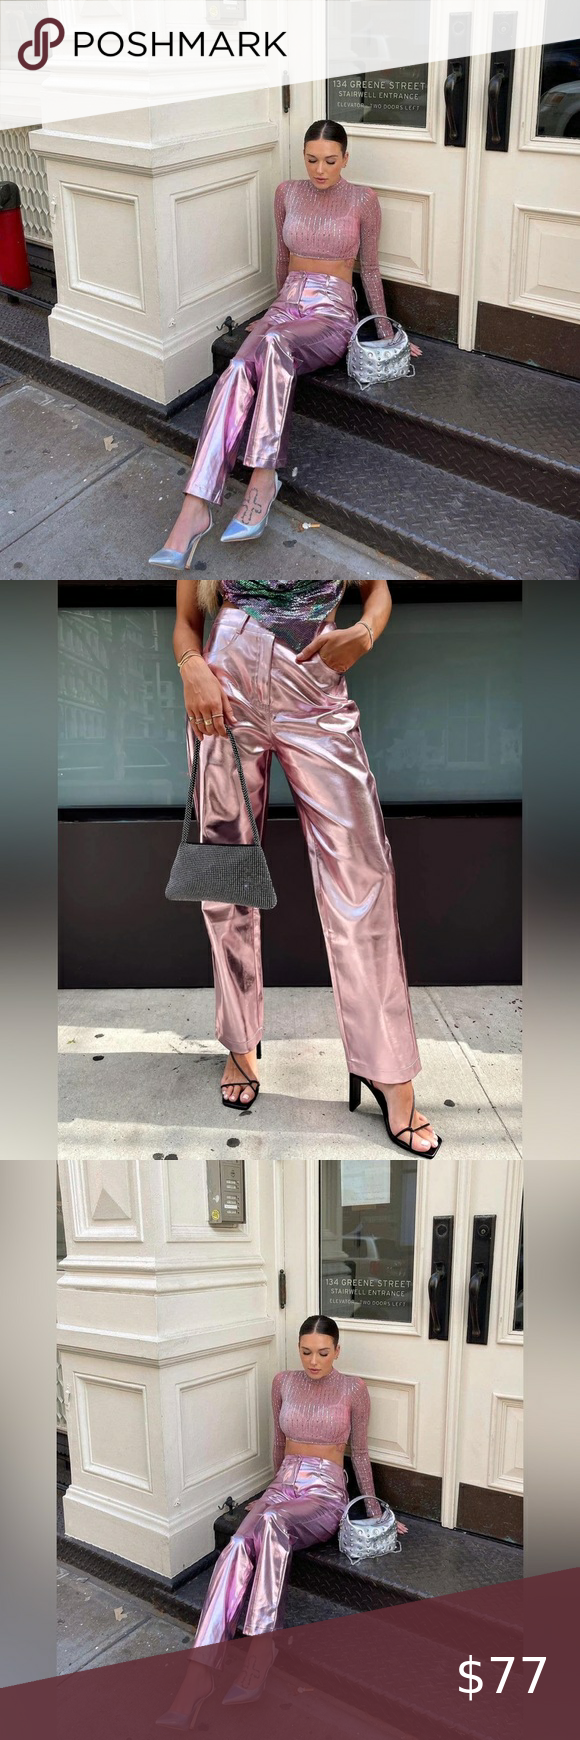 Shine On: How to Style Metallic Pants for a Chic Look